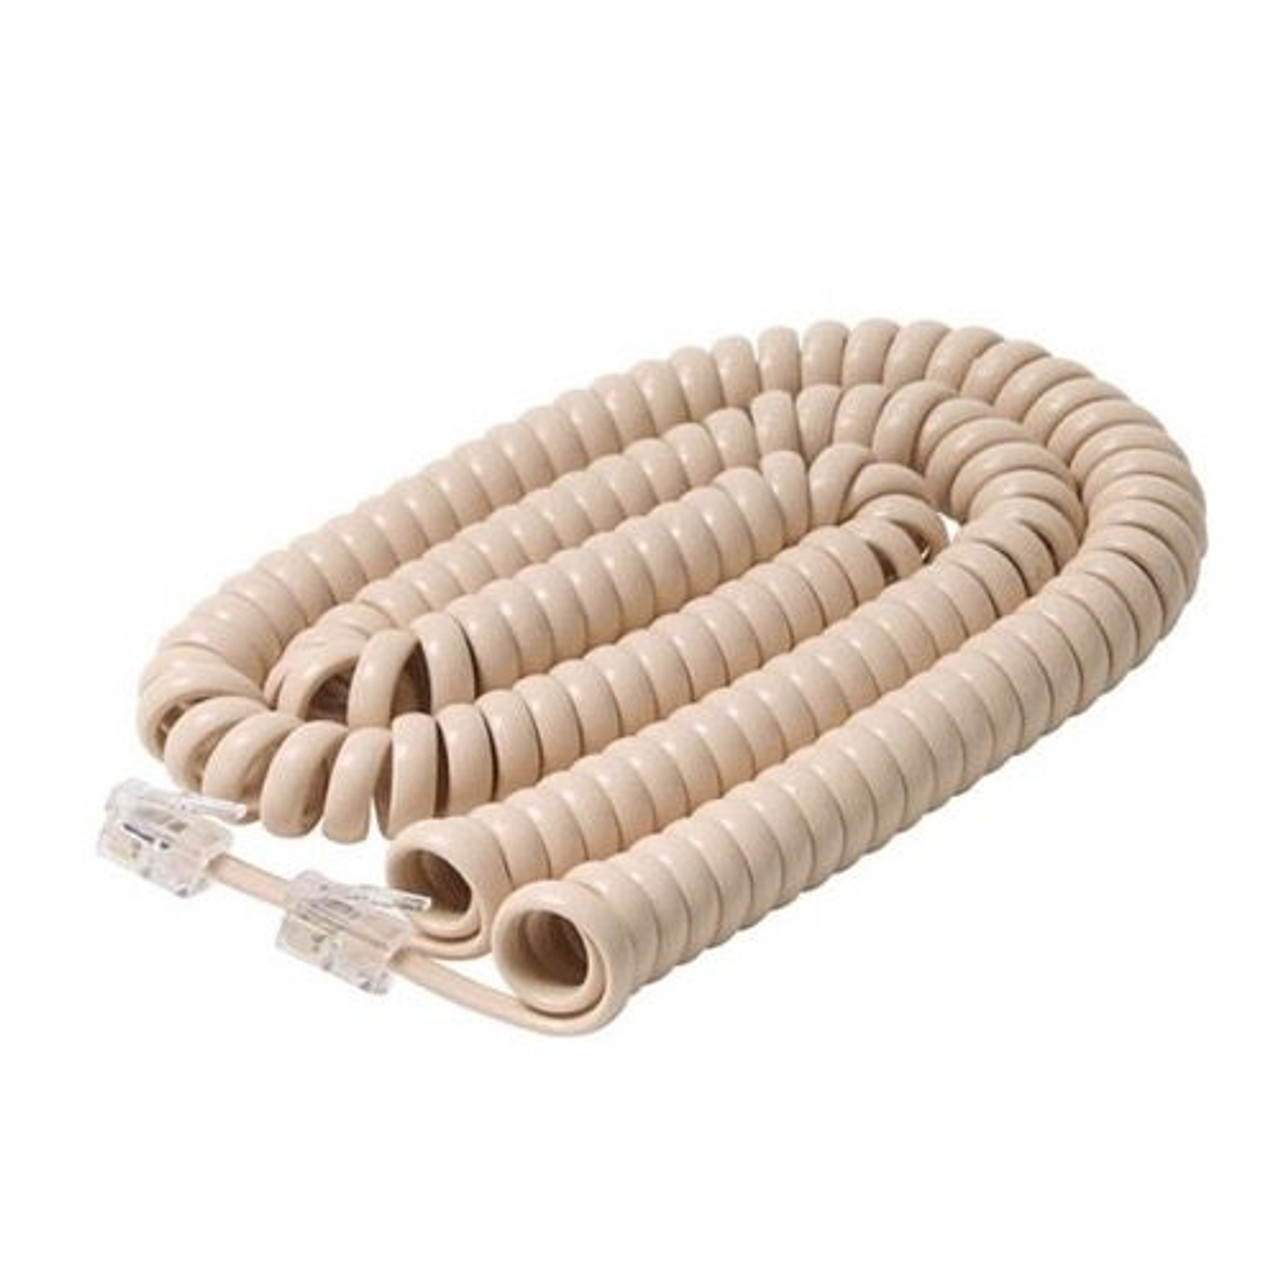 Eagle 15' FT Handset Phone Coiled Cord Ivory RJ22 Modular Plugs Each End 4-Conductor Coiled Telephone RJ-22 4P4C Phone Line Telephone Modular Hand-Set Snap-In Replacement